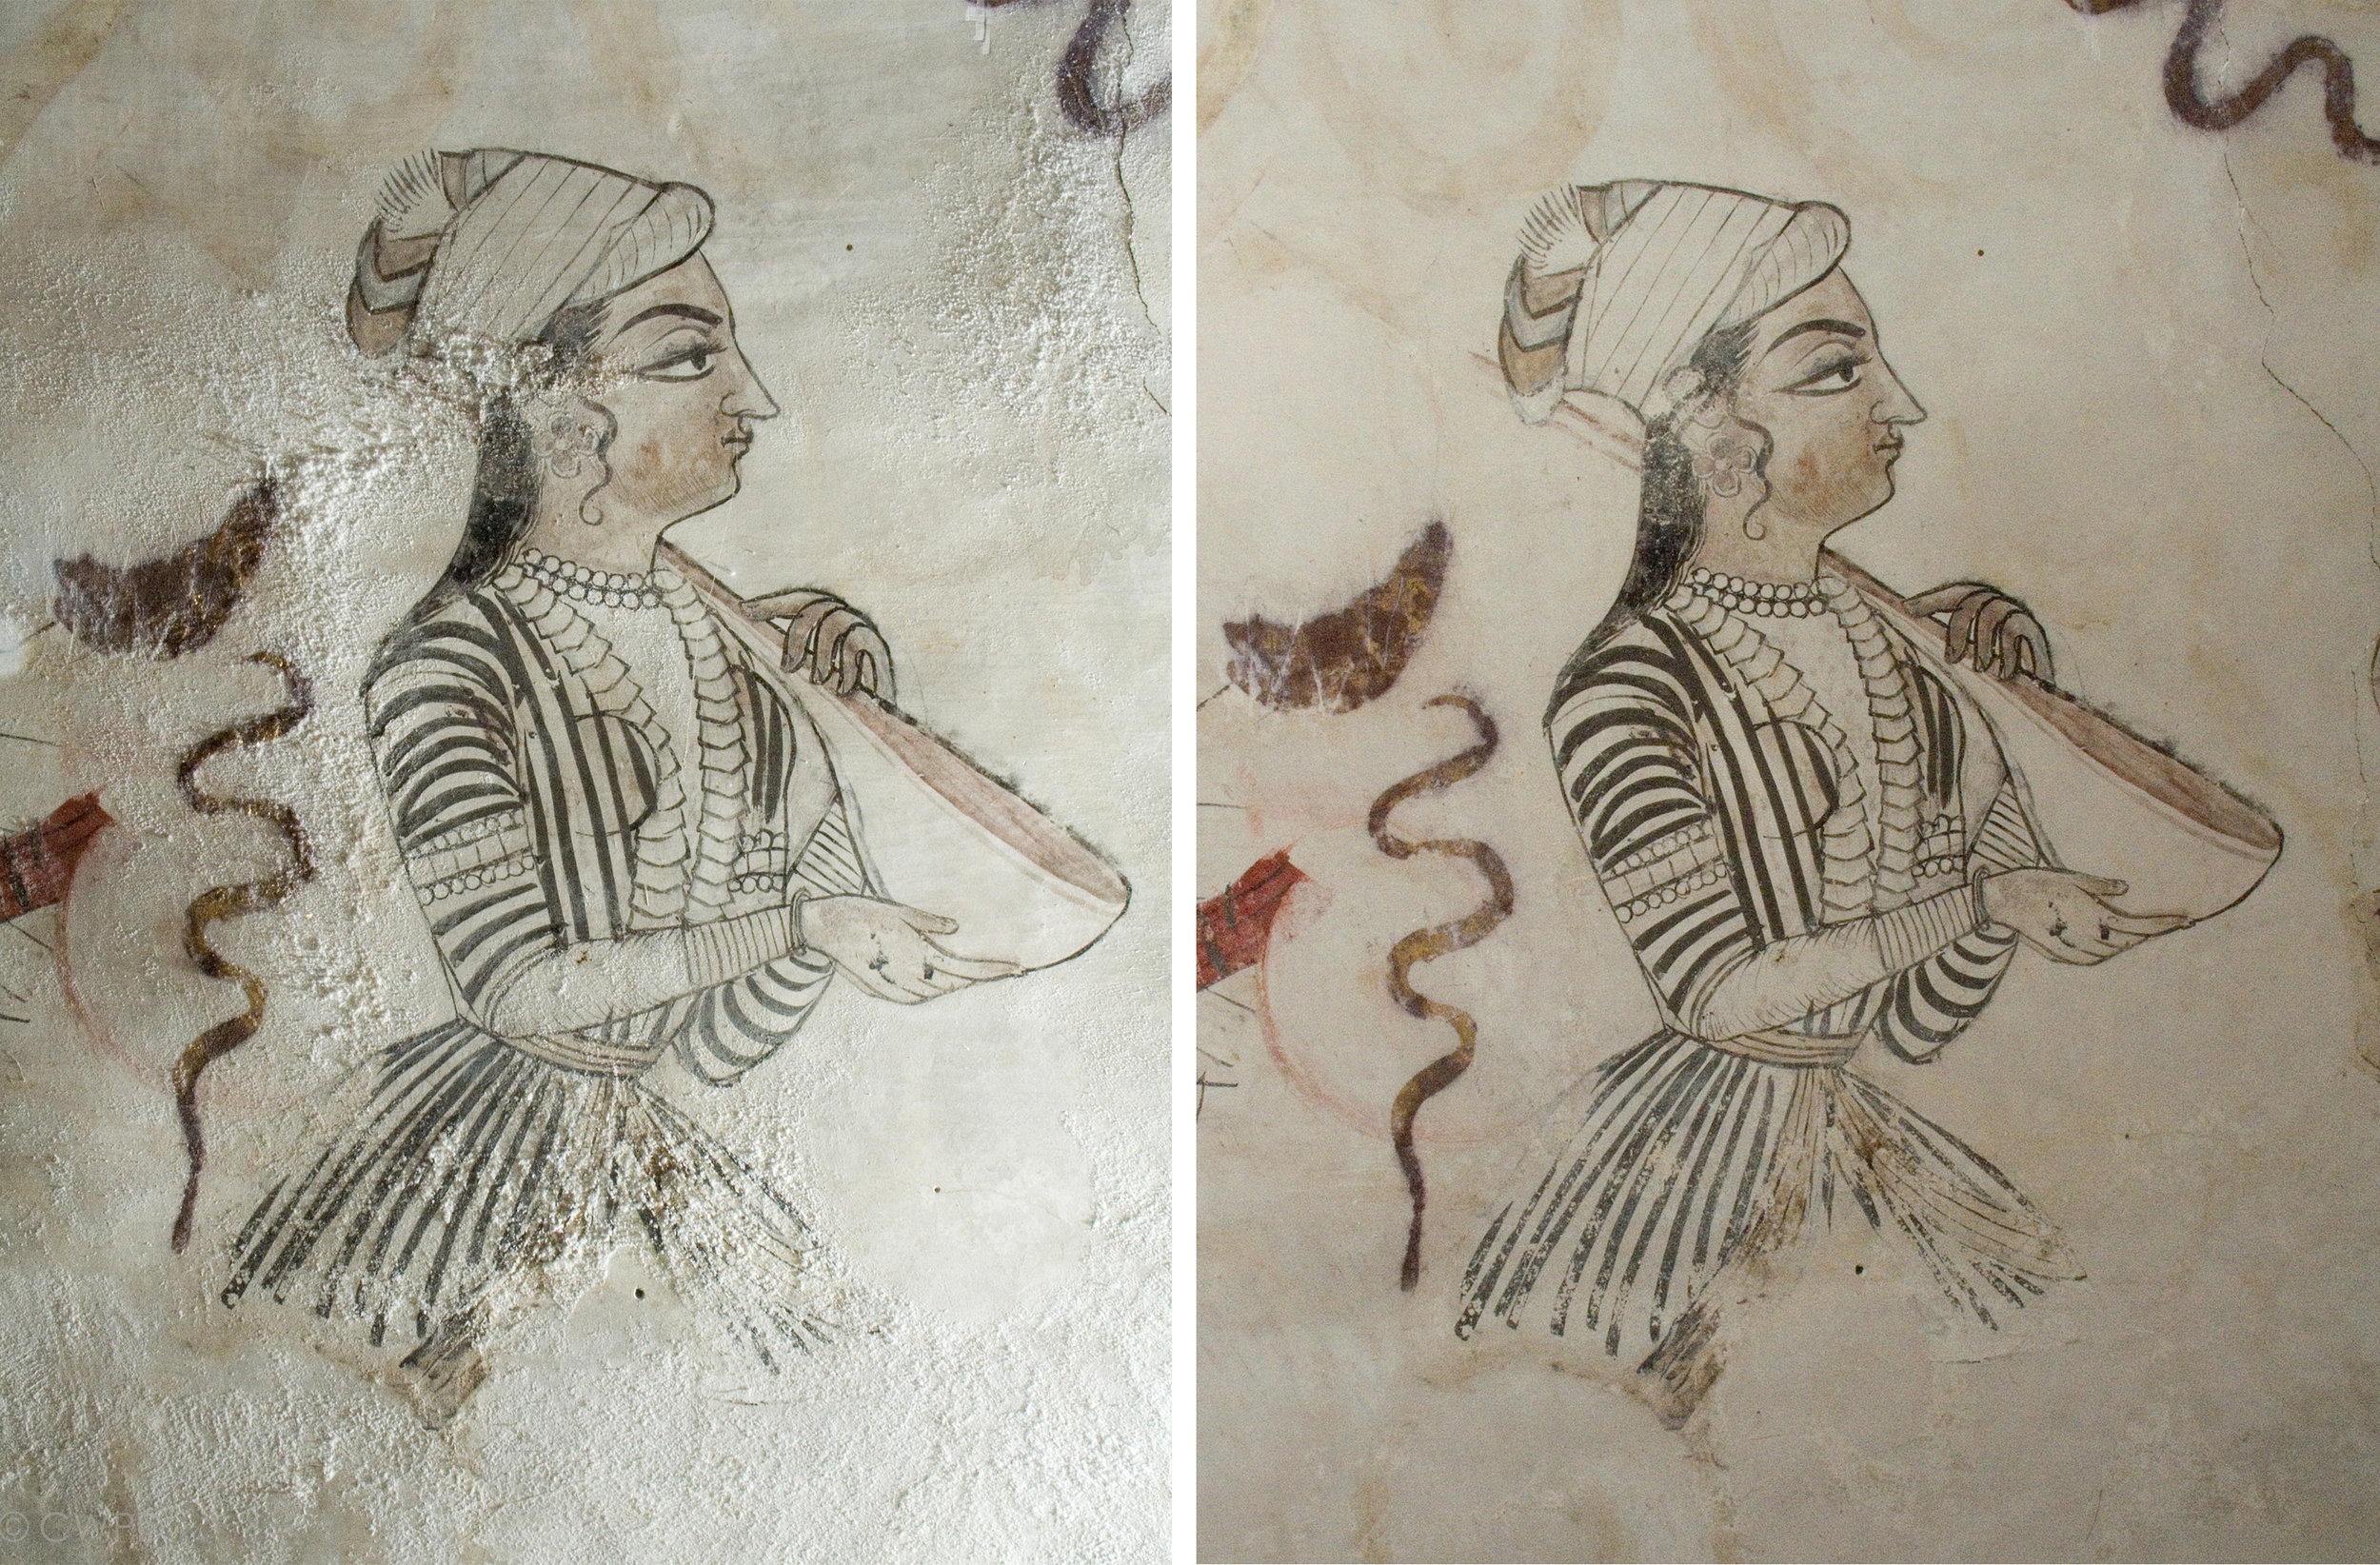  Before (left) and after (right) removal of salts from the wall paintings.&nbsp;  Image © Courtauld CWPD 